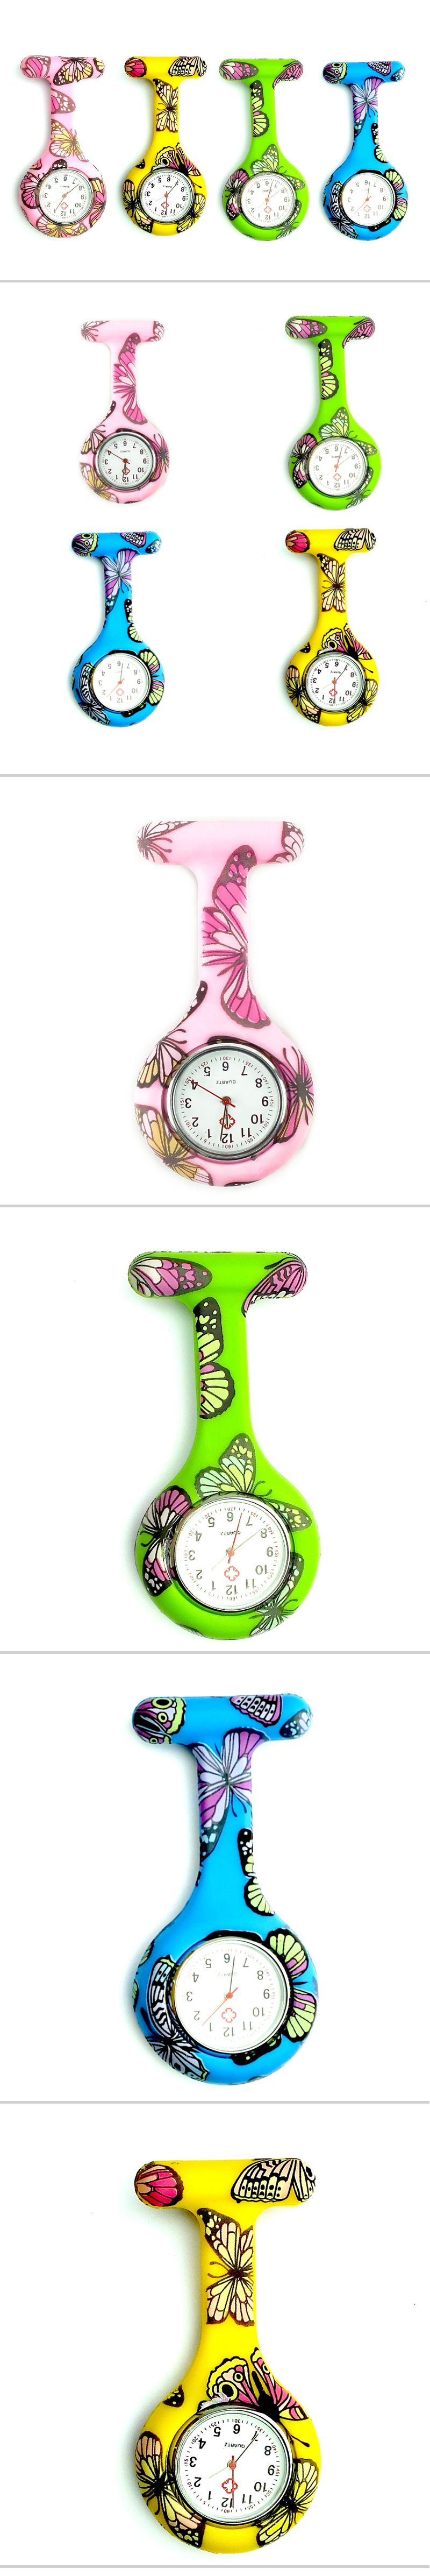 Butterfly-Pattern-Nurse-Watch--Colorful-Silicone-Pocket-Watch-Doctor-Fob-Watch-1279560